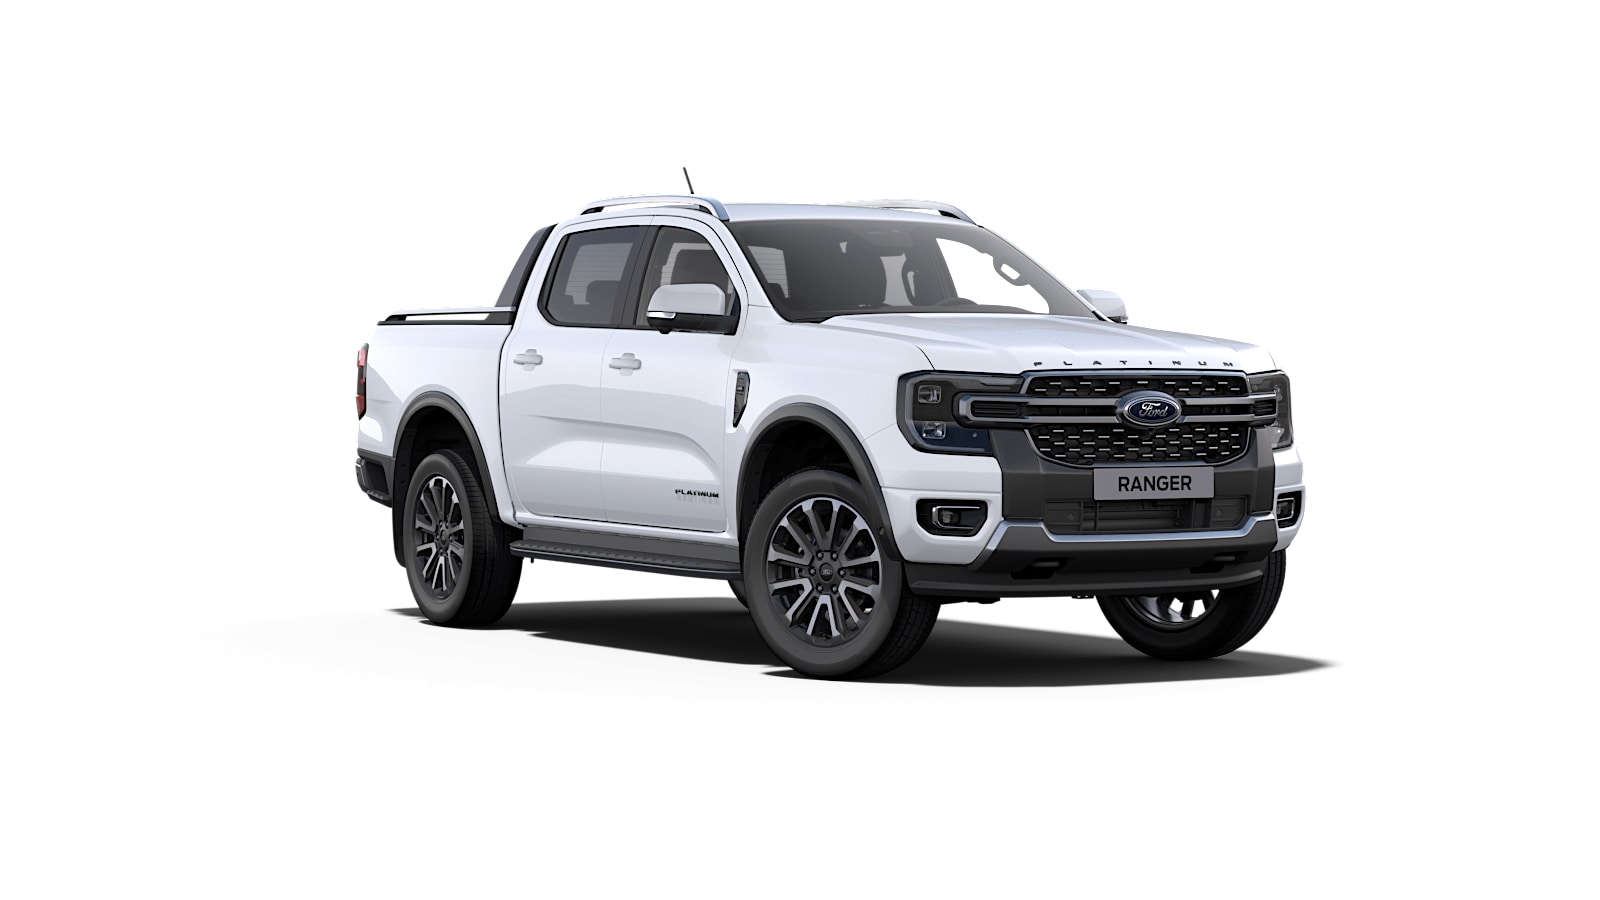 Grey Ford Ranger Platinum from 3/4 front angle